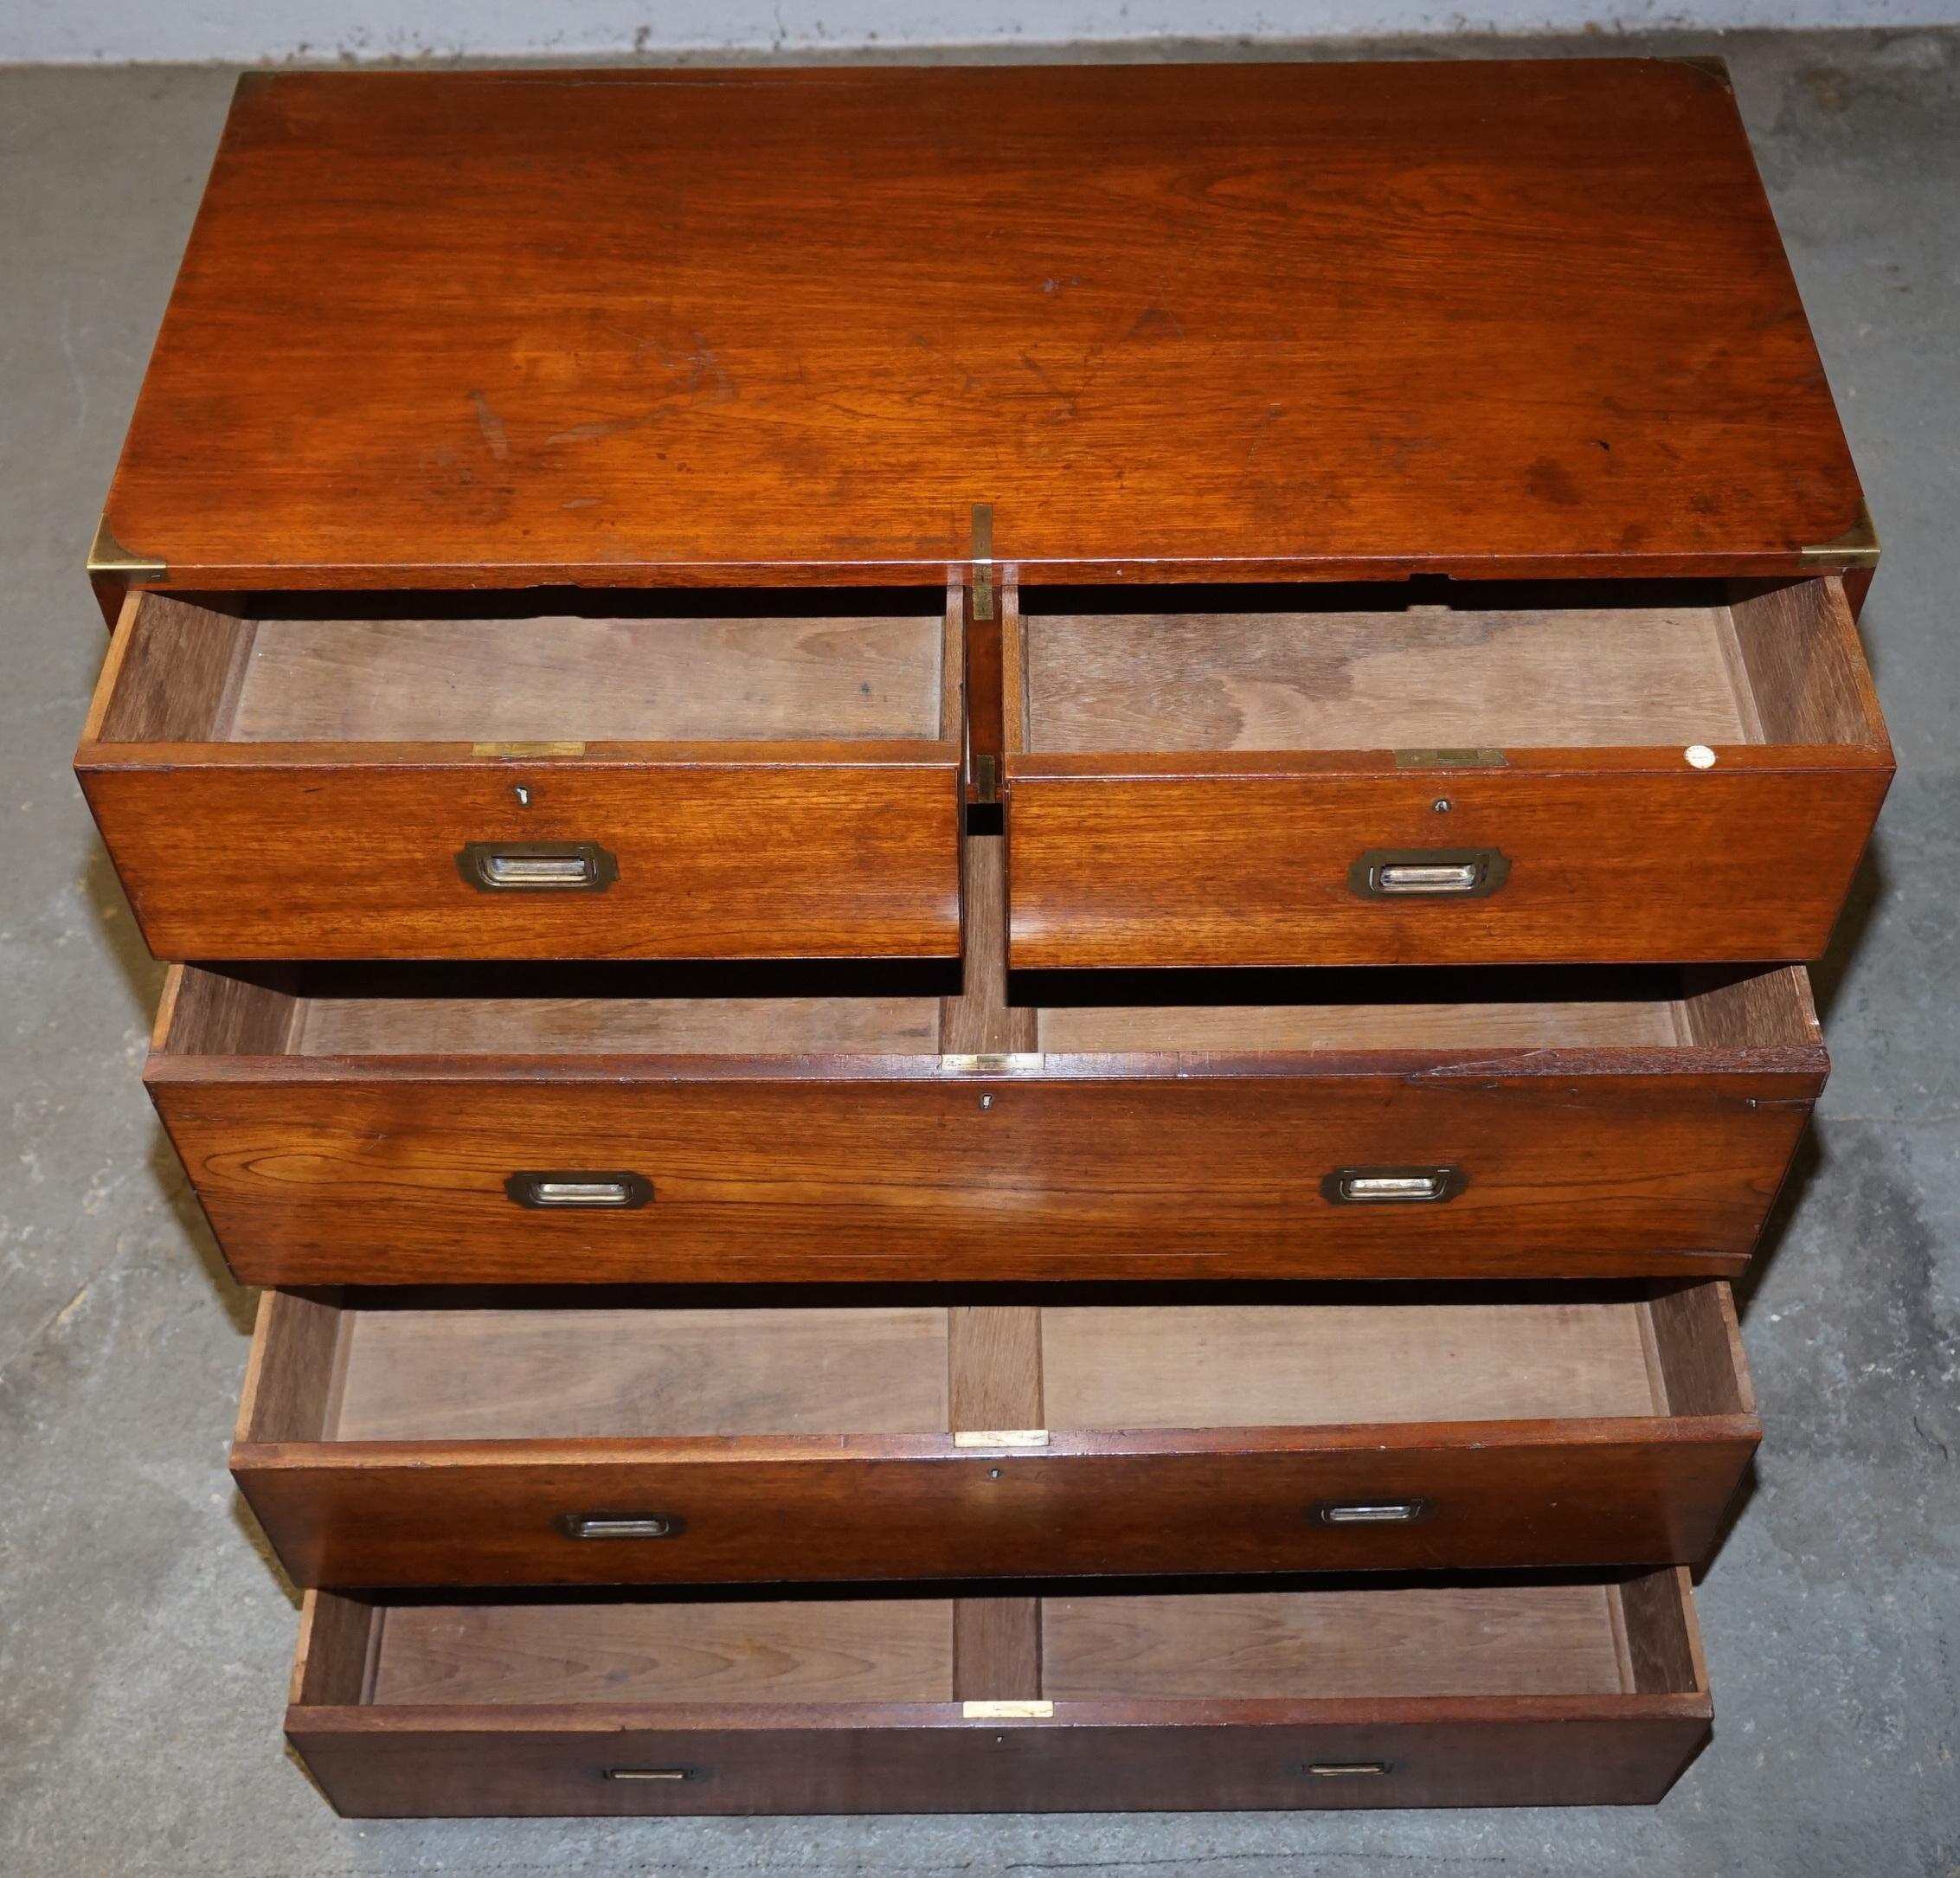 Original circa 1900 Army & Navy C.S.L Stamped Military Campaign Chest of Drawers 10